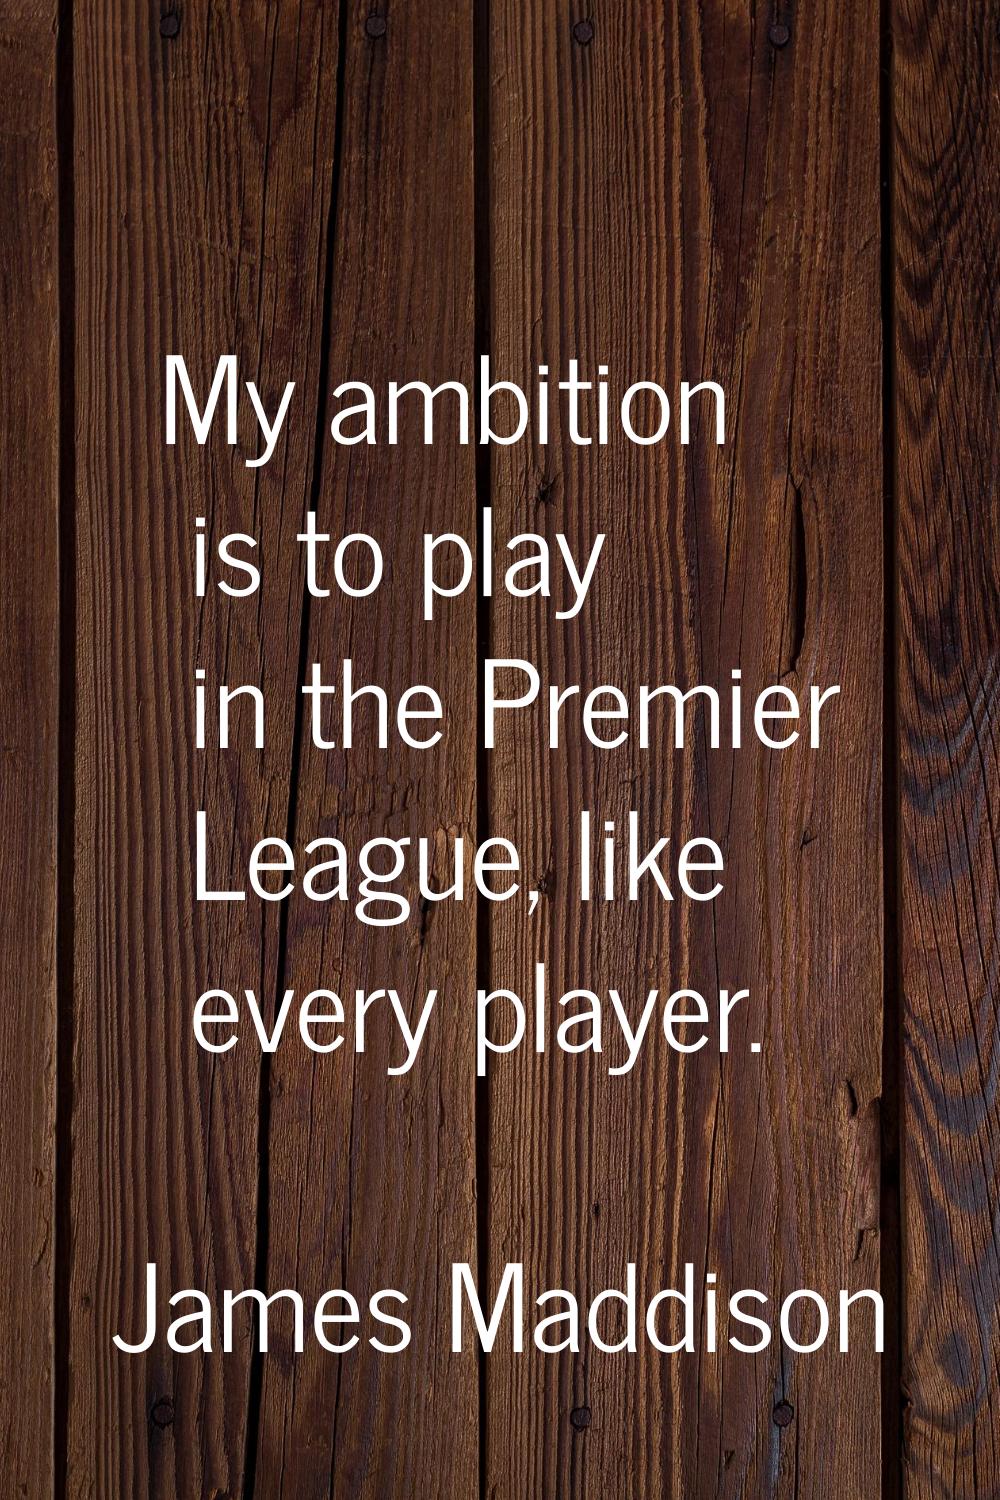 My ambition is to play in the Premier League, like every player.